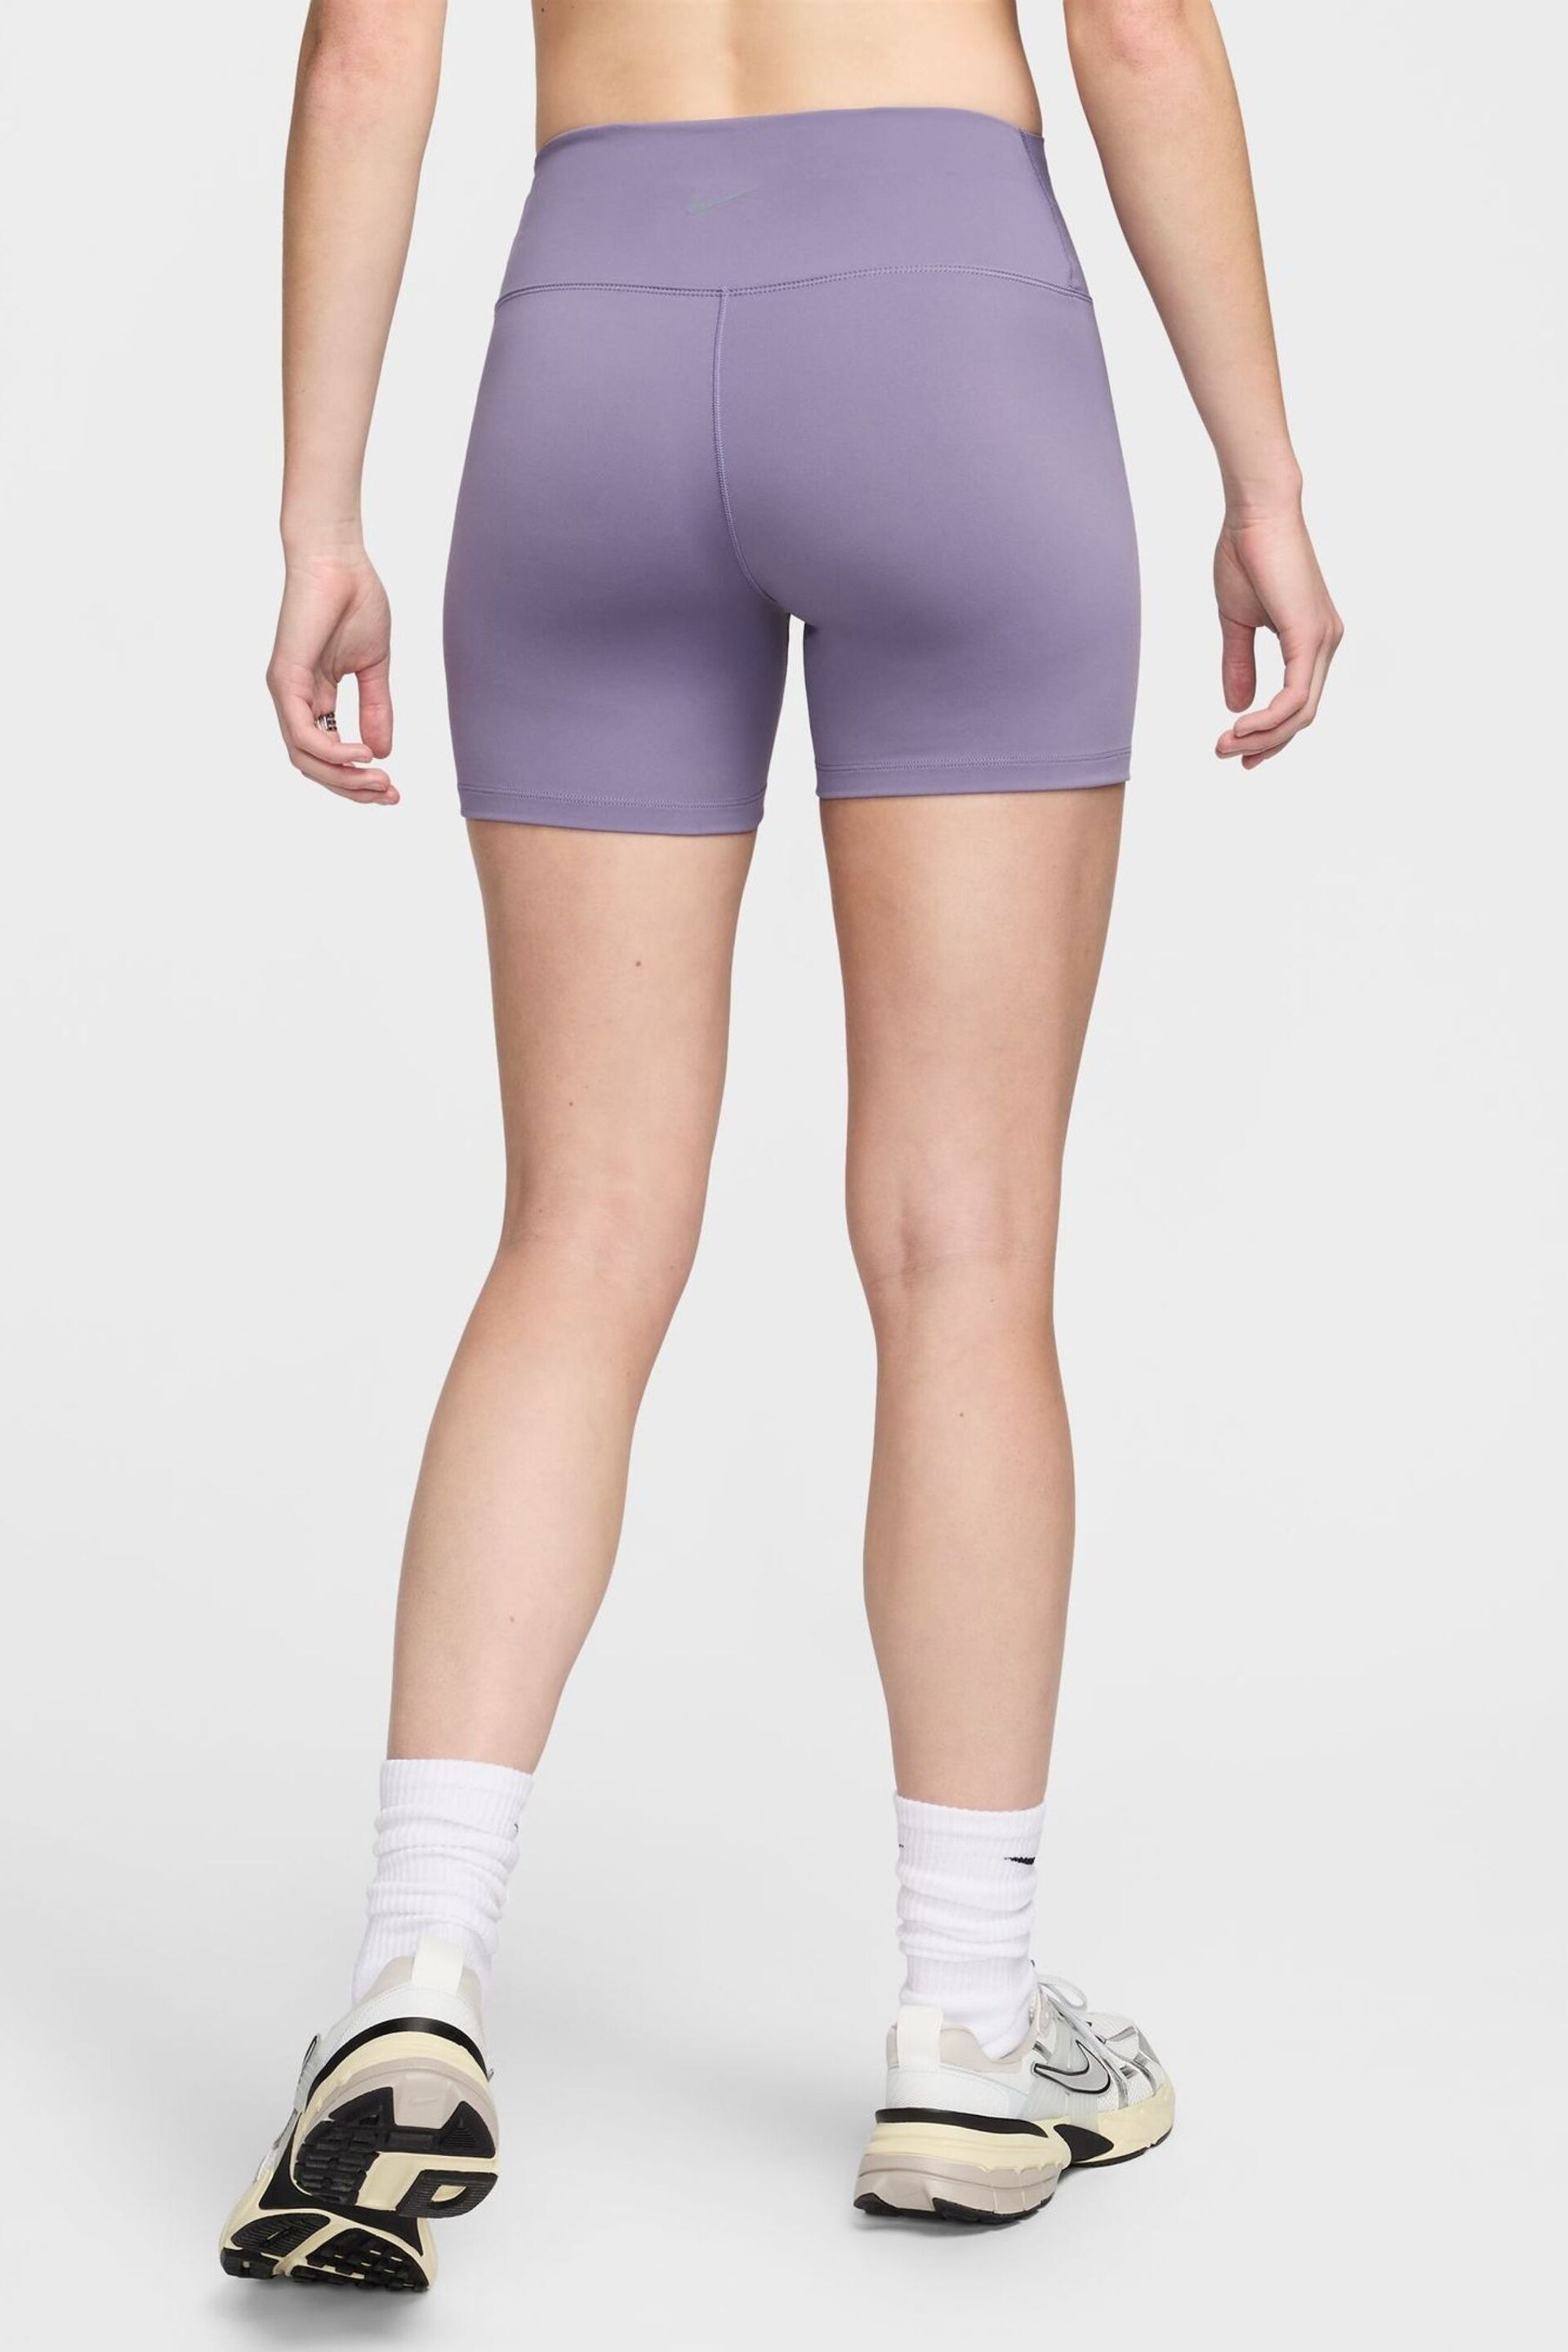 Nike Purple Dri-FIT One High Waisted 5 Cycling Shorts - Image 2 of 8